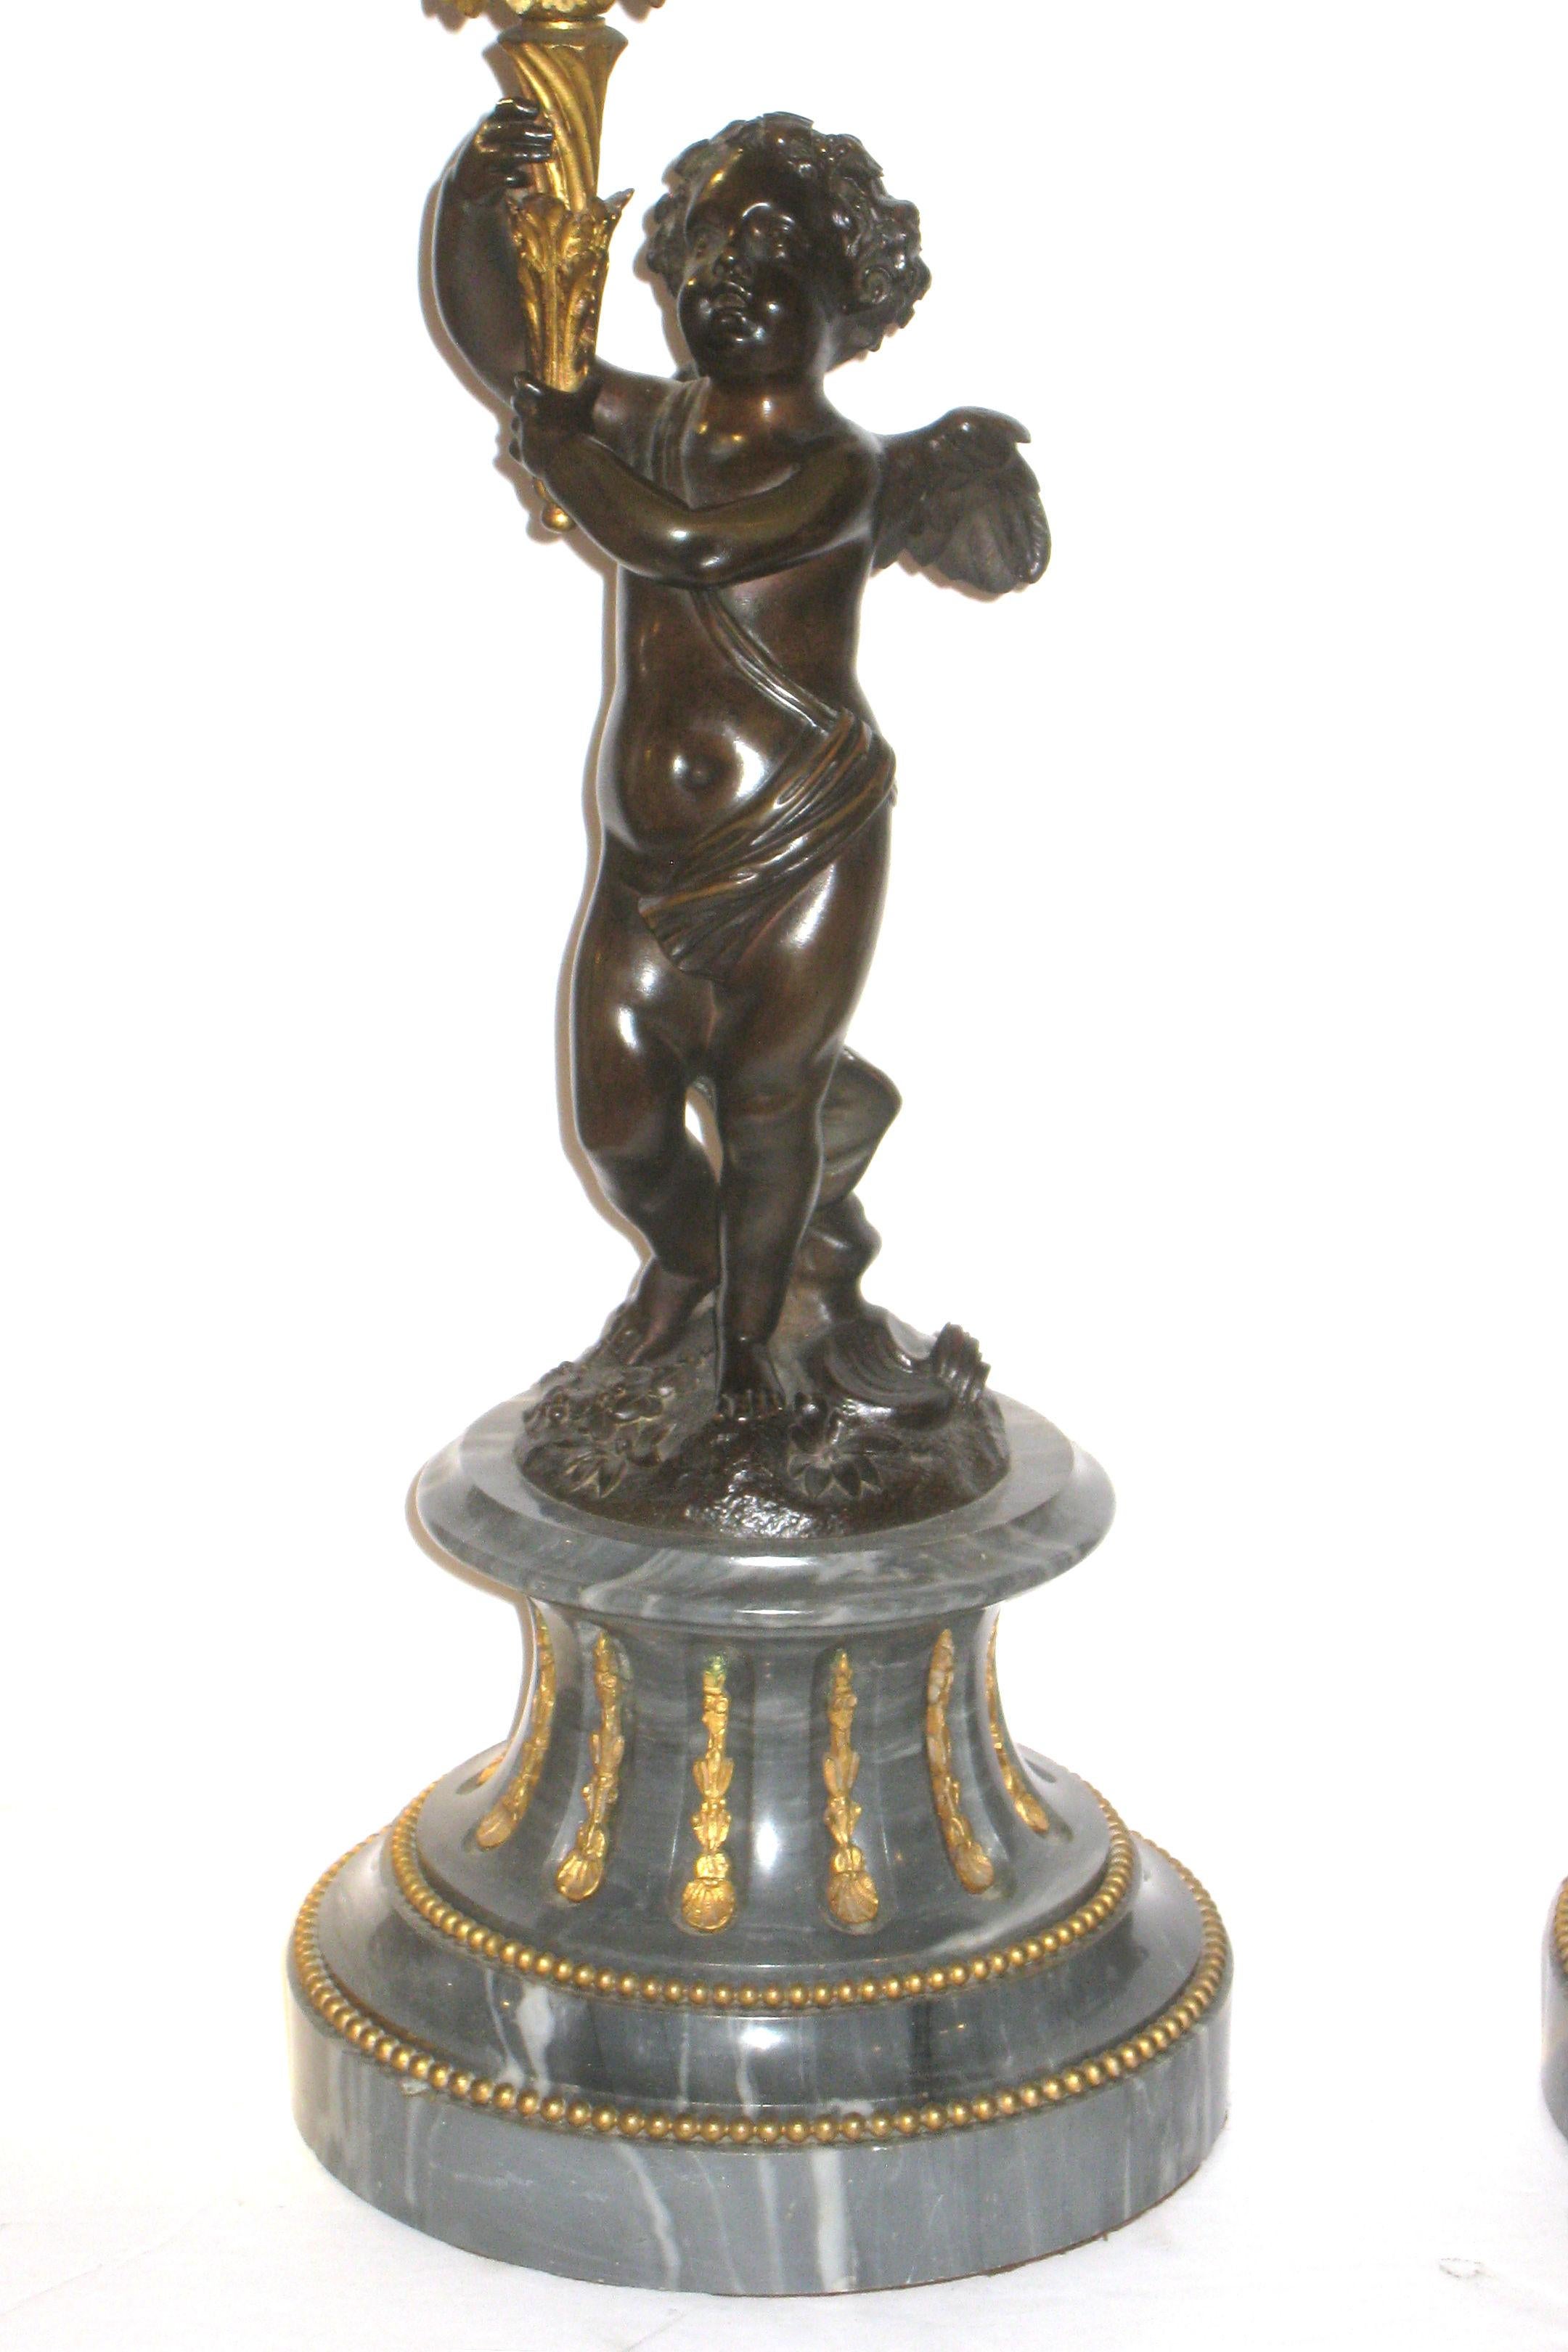 Pair of French 19th century Louis XVI style gilt and patinated figural bronze and marble candelabras with cherub motifs.